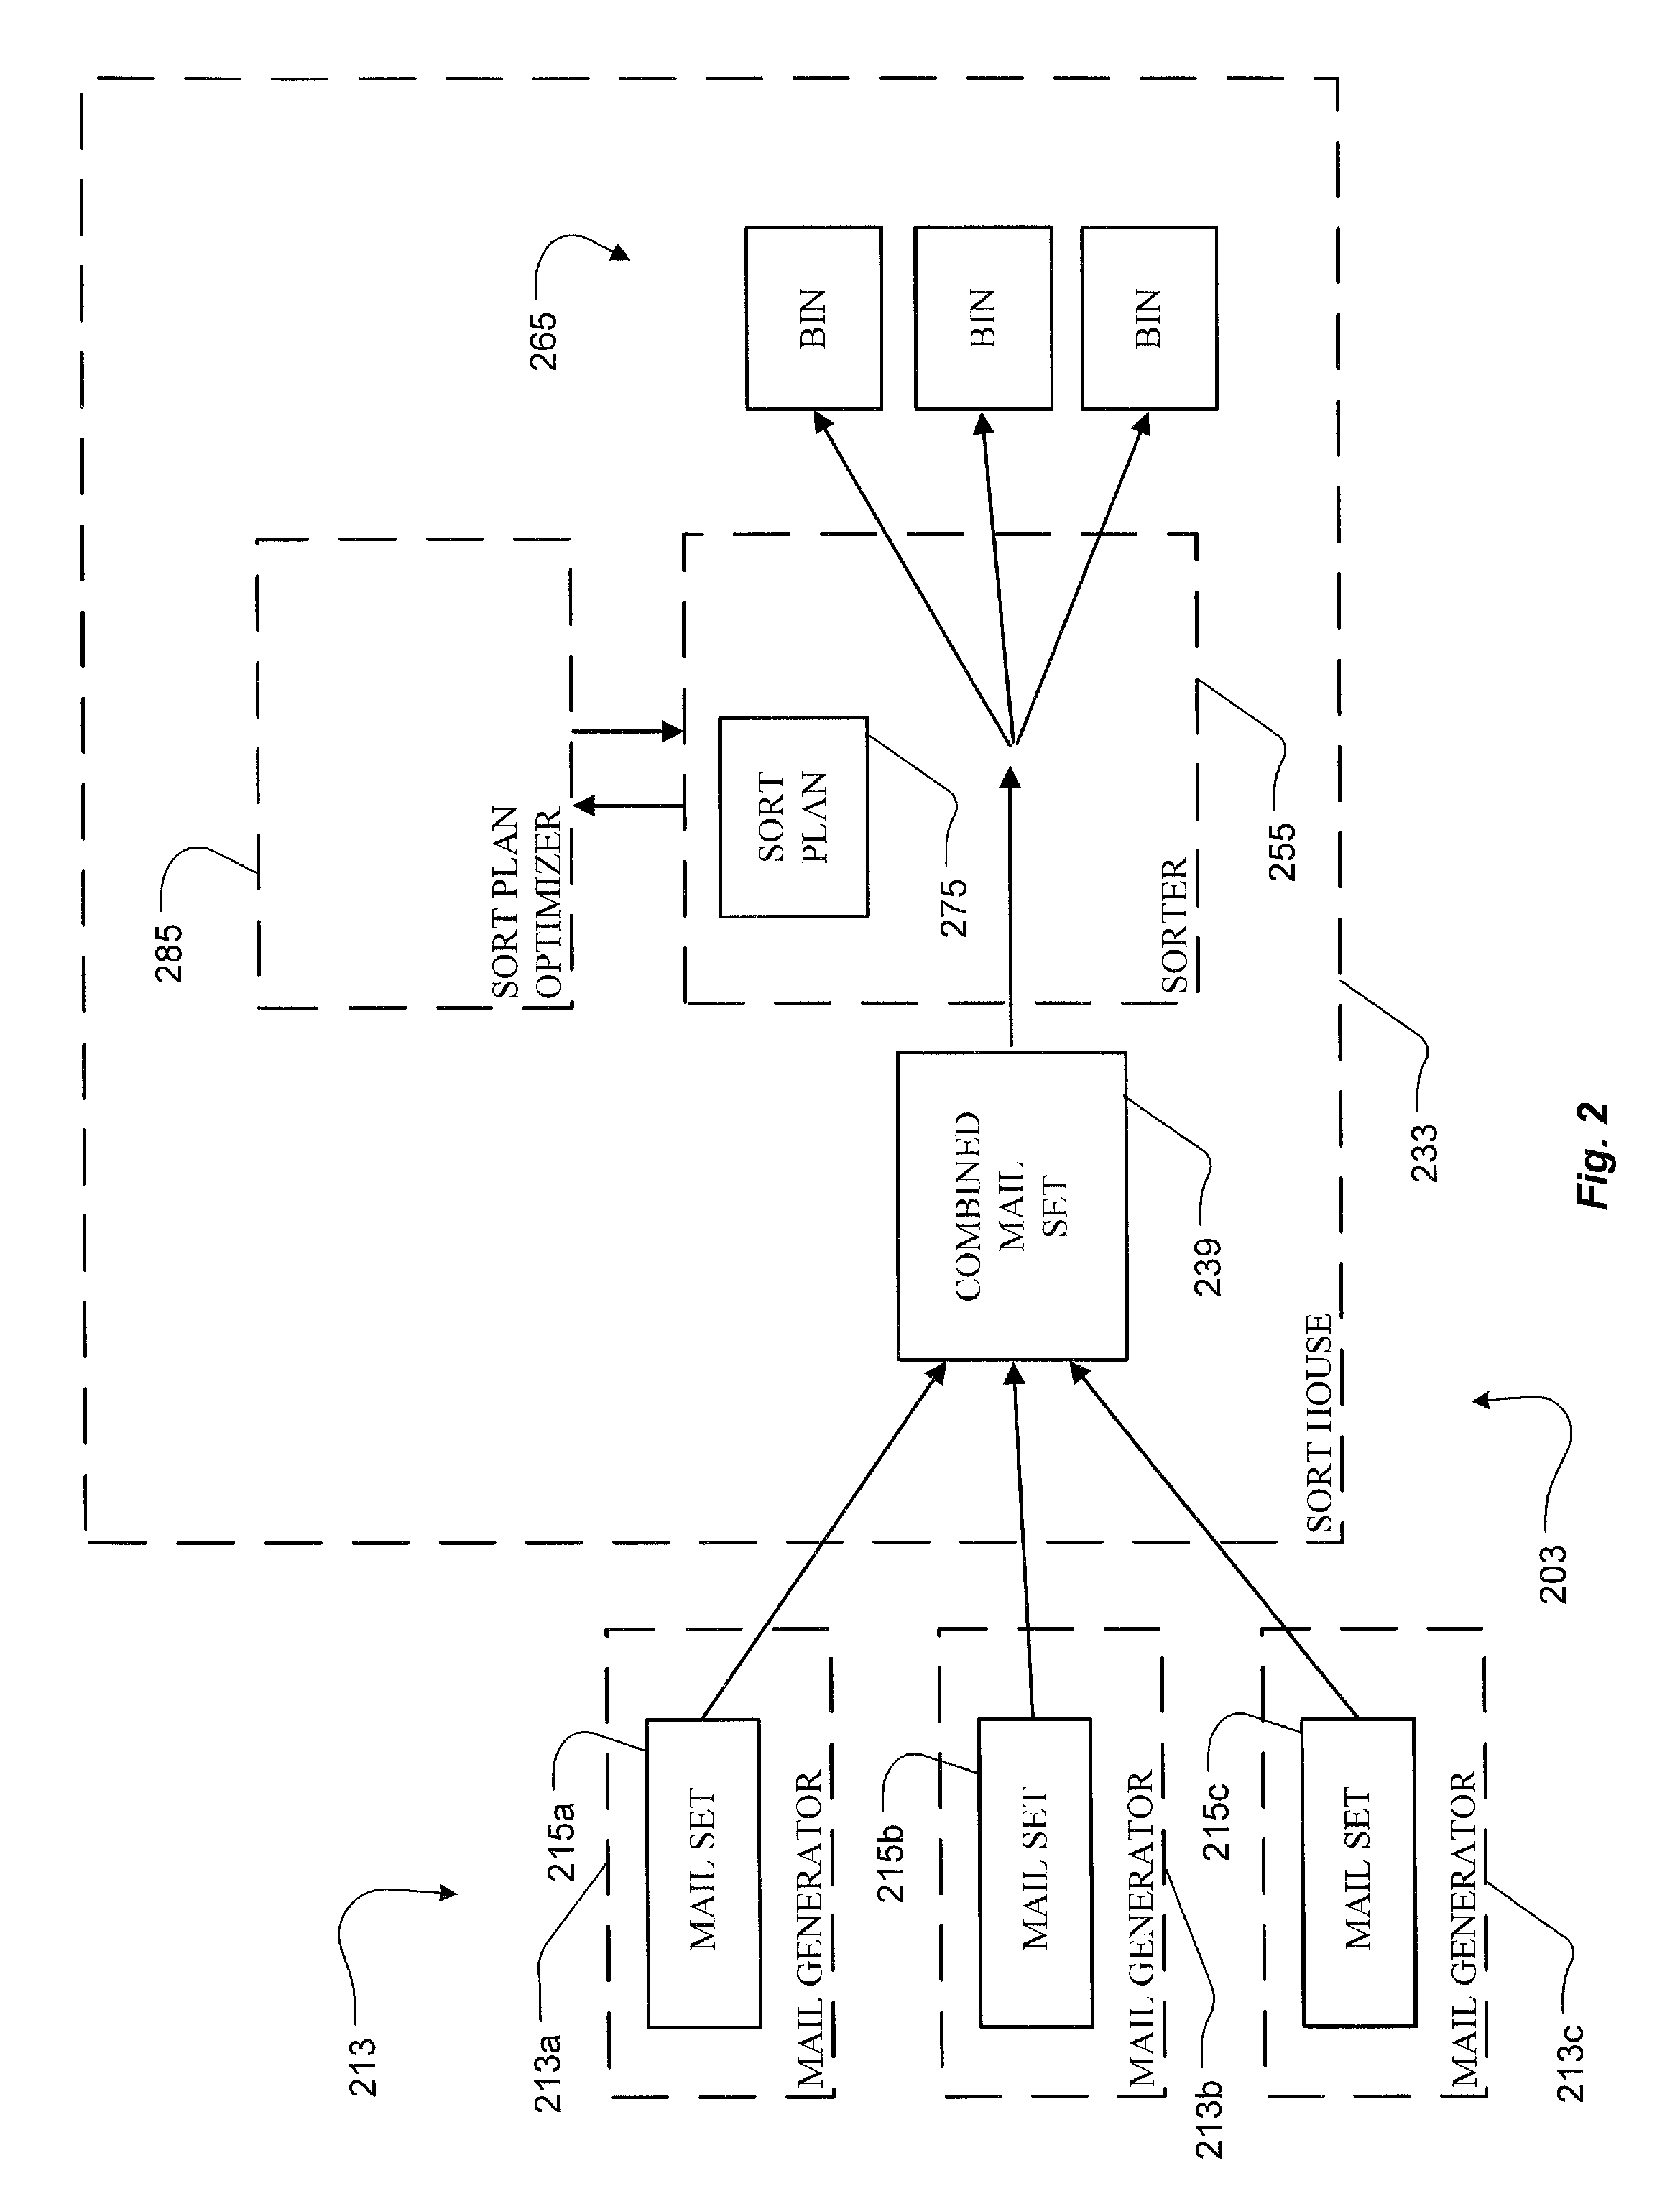 System and method for optimizing a mail document sorting machine